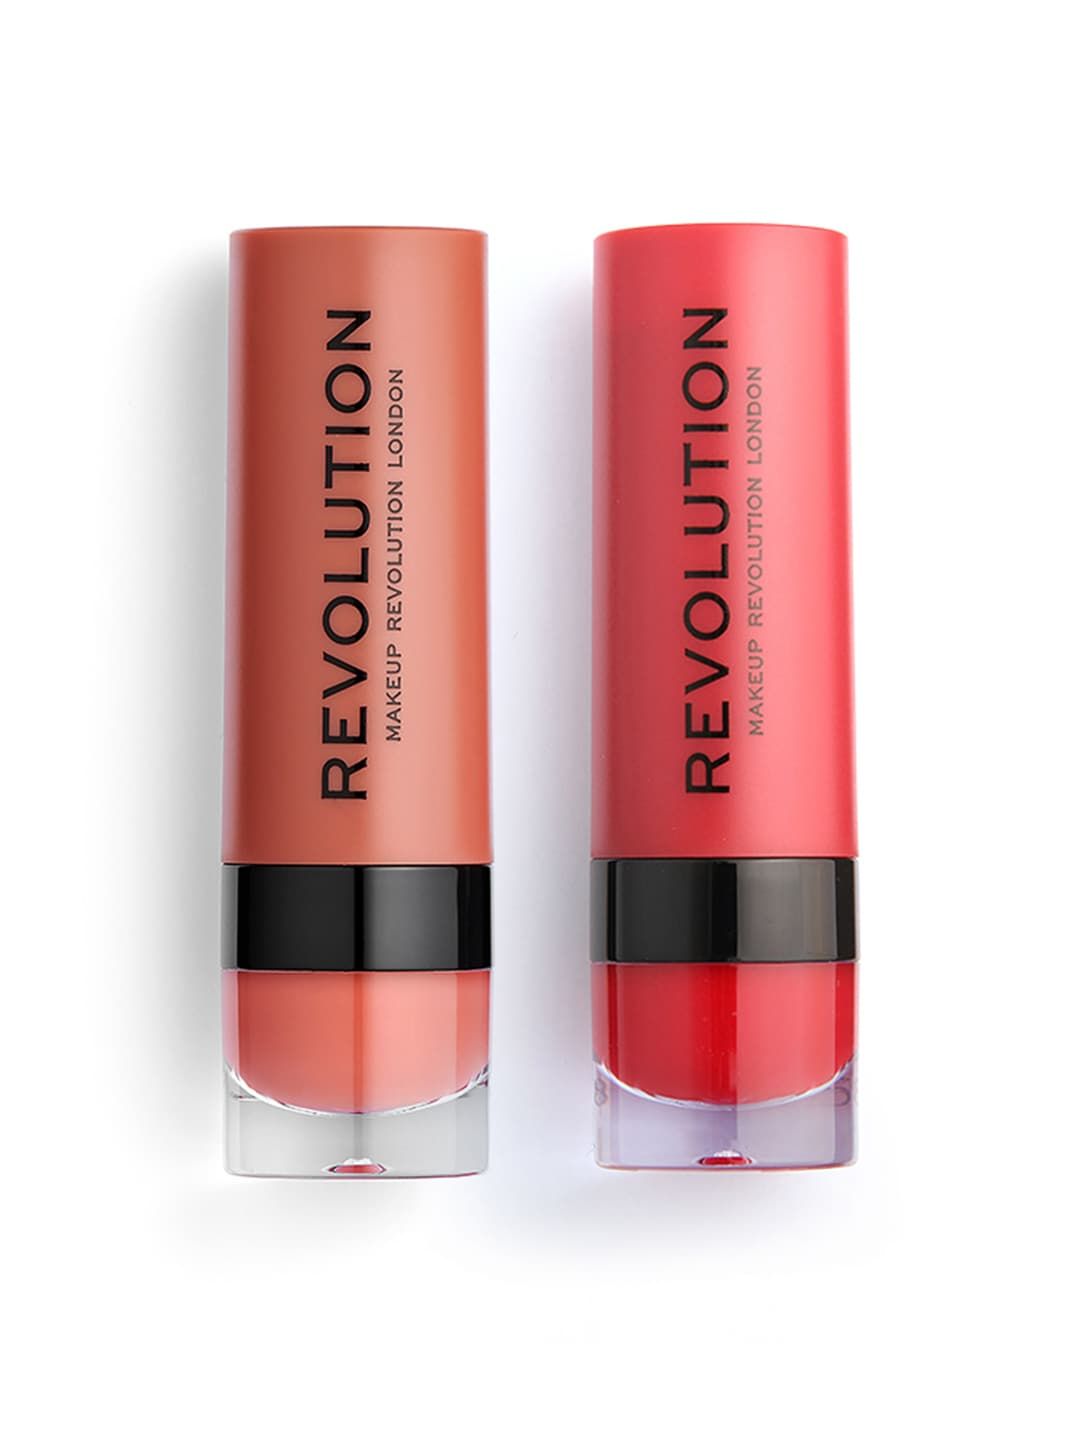 Makeup Revolution London Set of Day to Night Matte Lipsticks - Cherry 132 & Attraction 105 Price in India